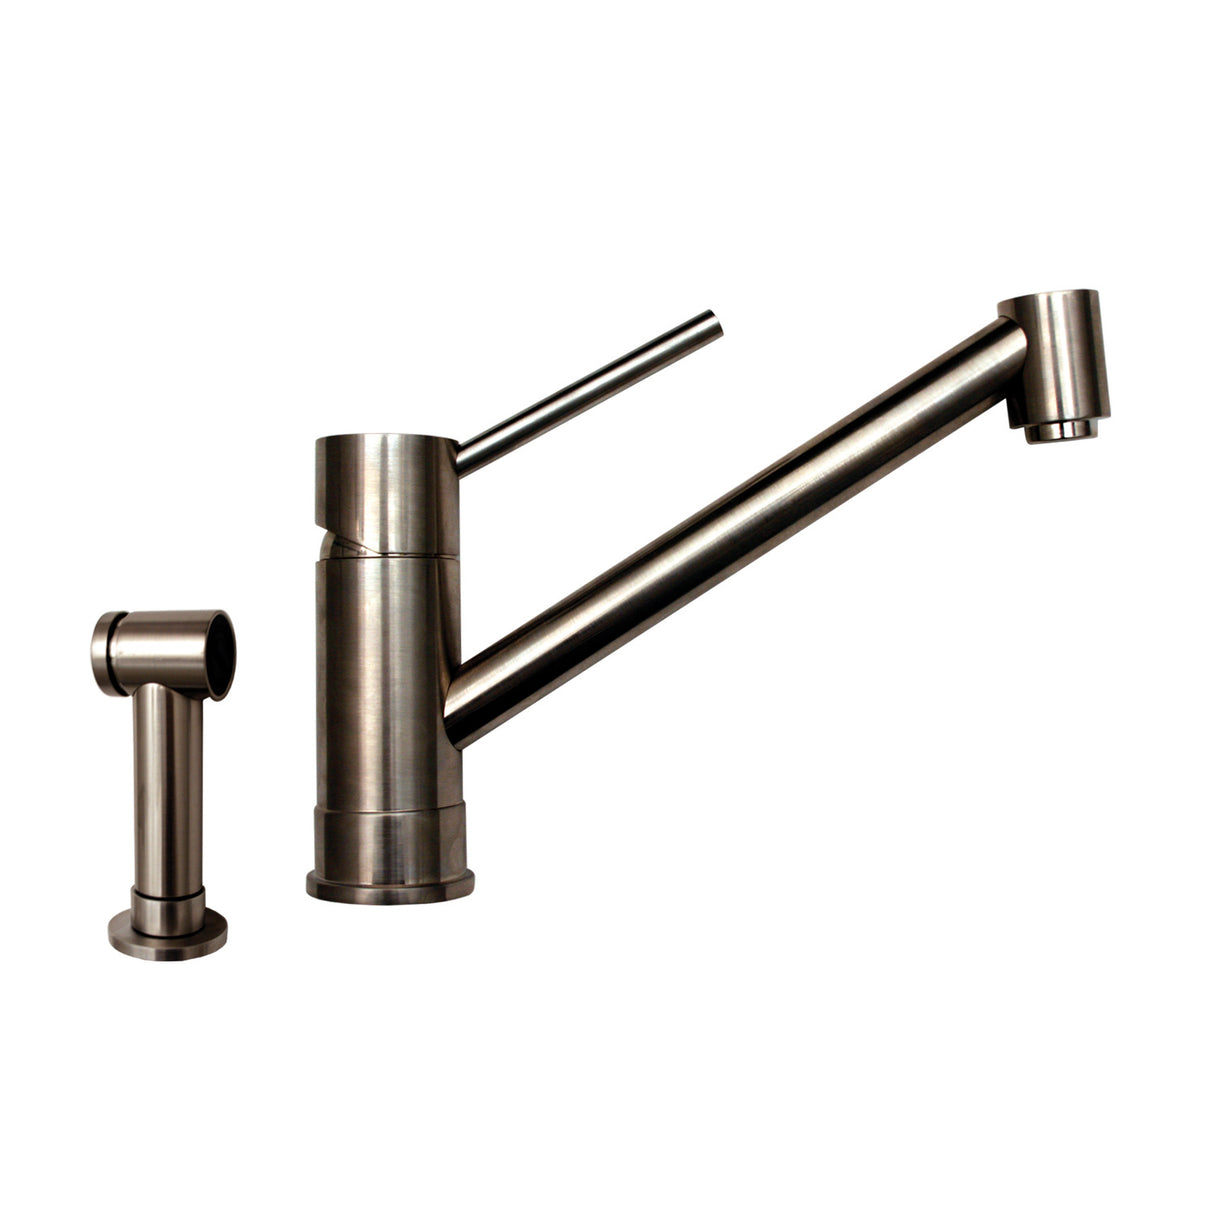 FX Navigator Stainless Steel Single Extended Lever Handle Faucet with Matching Solid Stainless Steel Side Spray